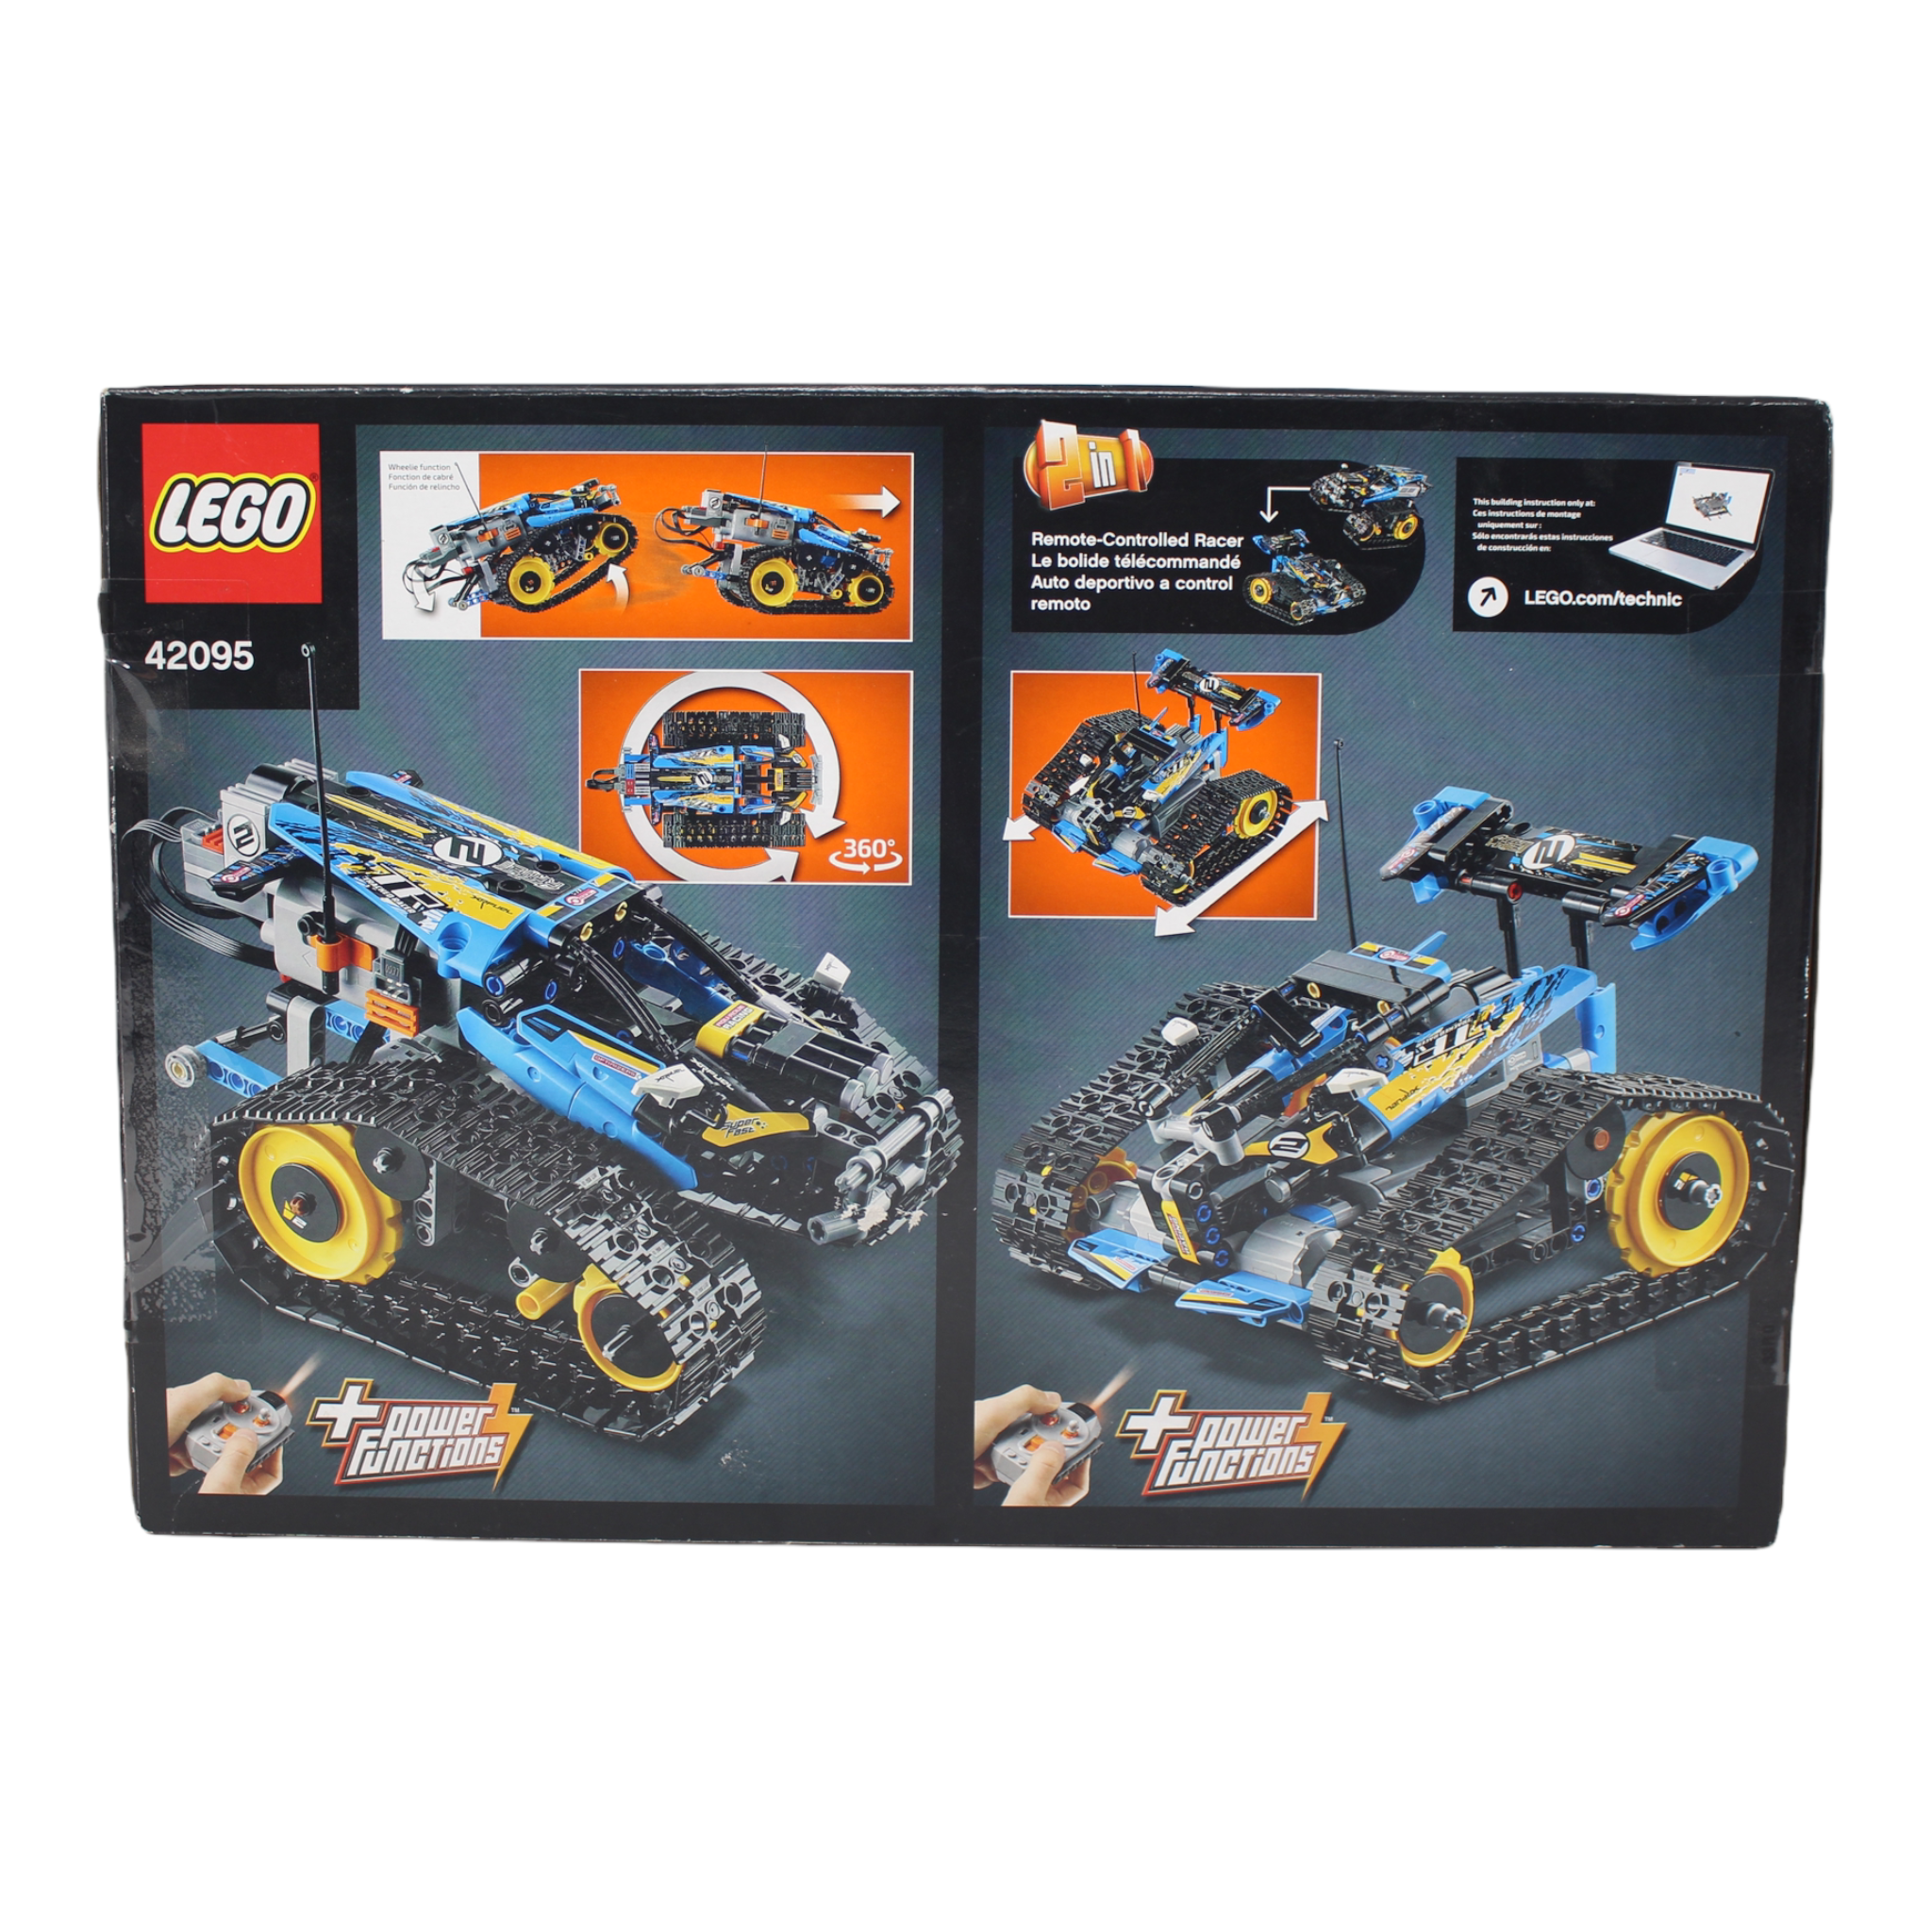 embargo Sequel Spis aftensmad Certified Used Set 42095 Technic Remote-Controlled Stunt Racer